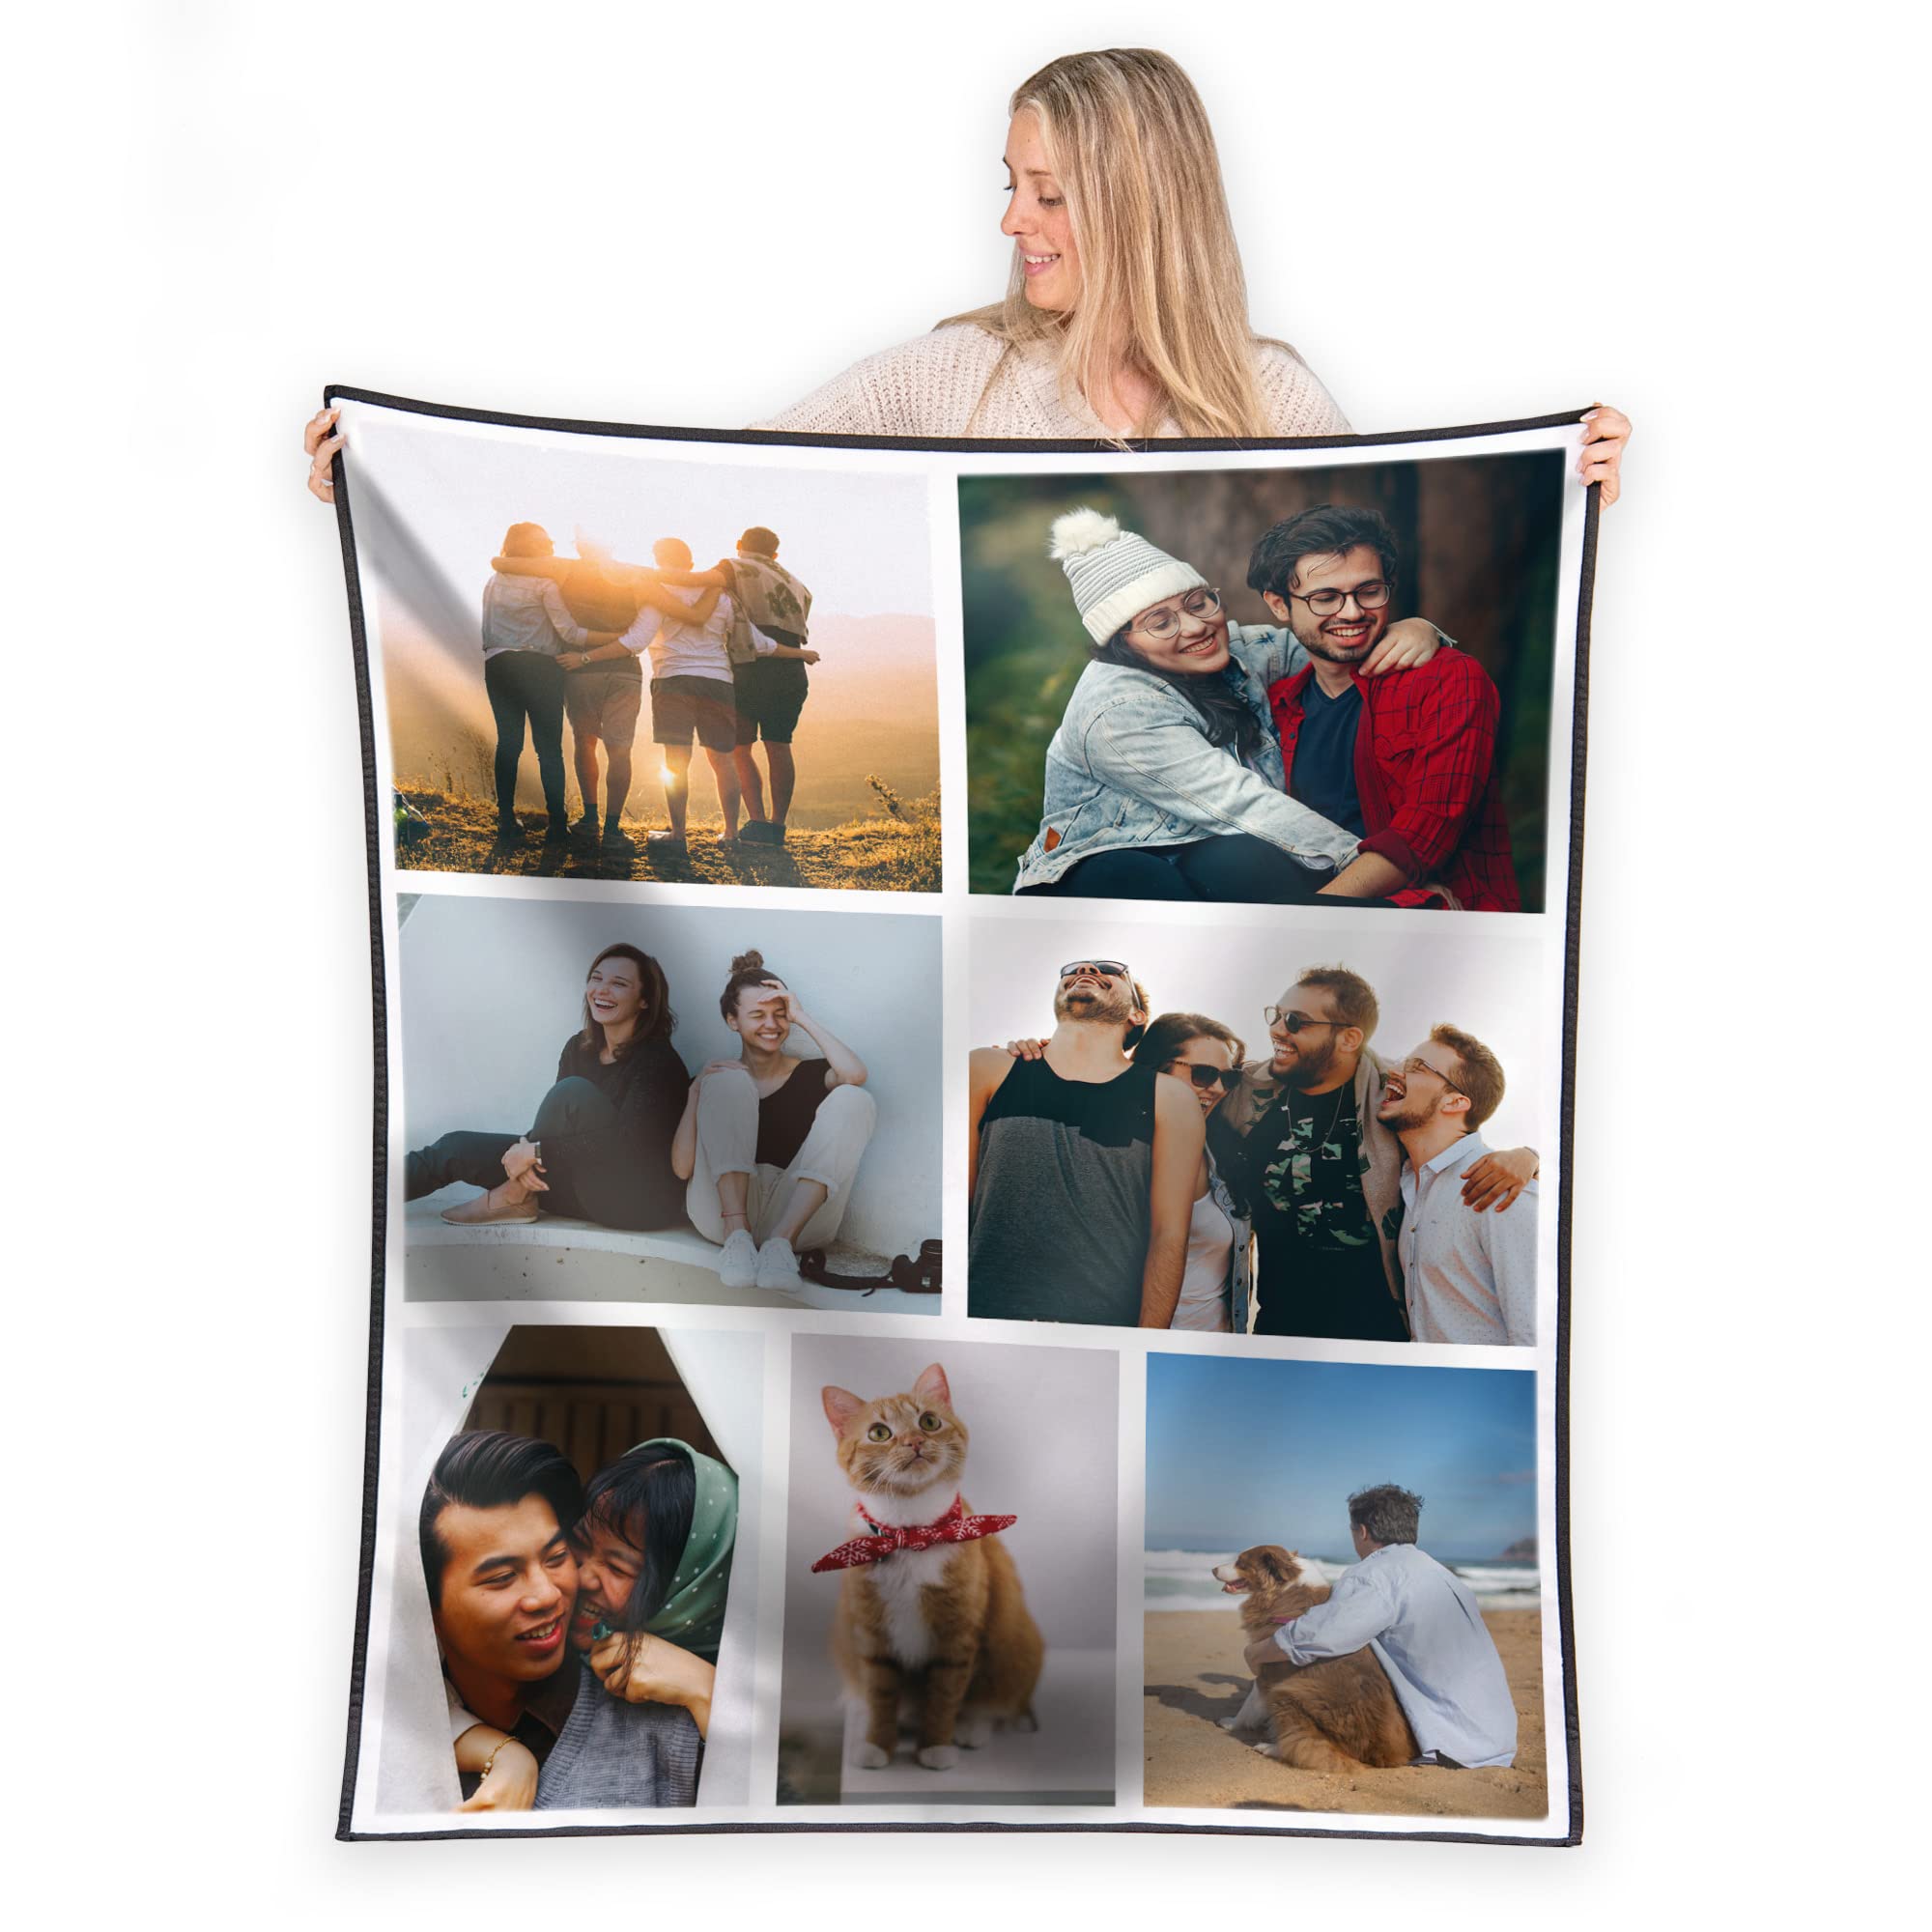 Blanket For Outdoor Photoshoot lords gifs